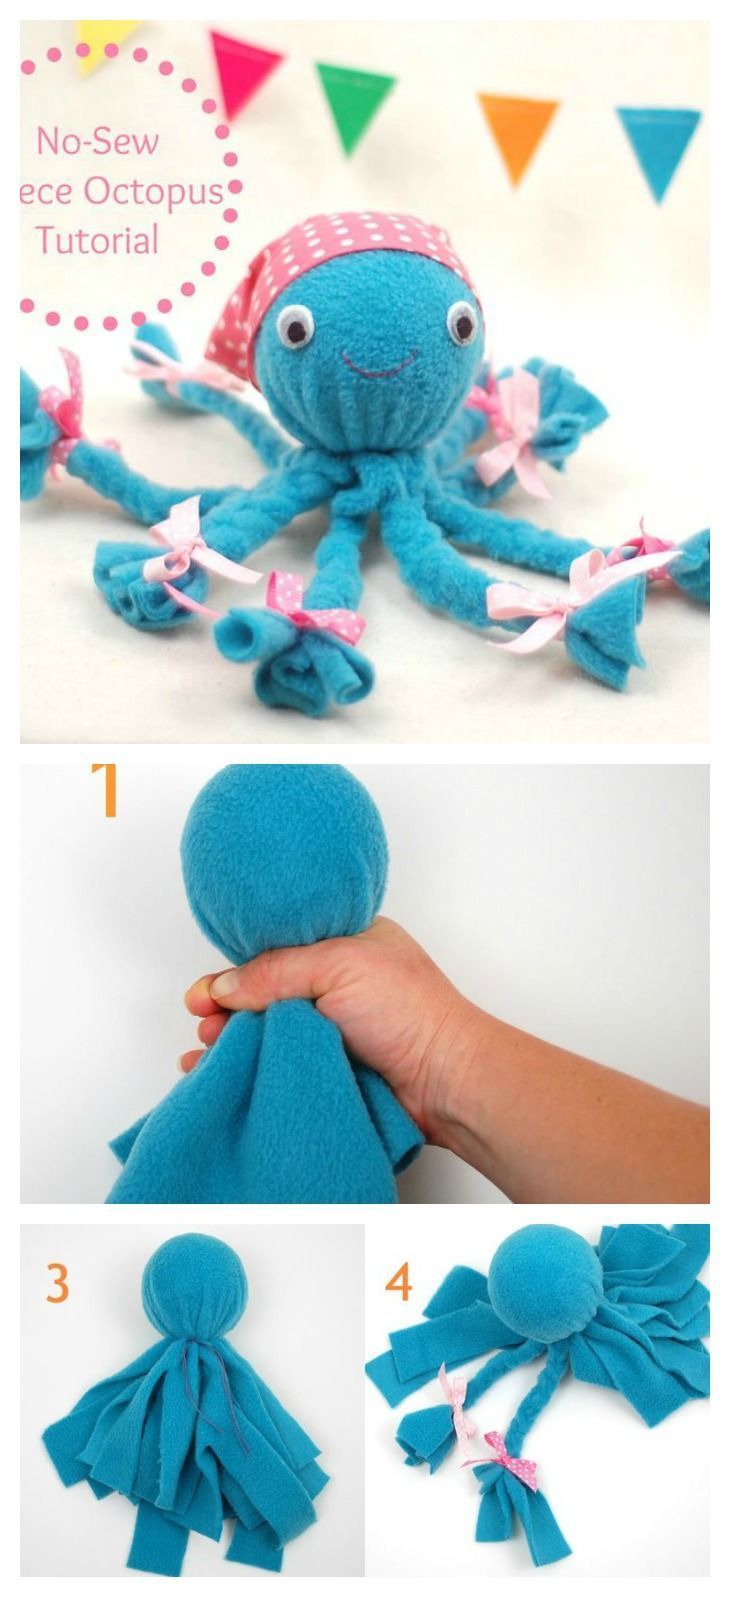 DIY No-Sew Fleece Octopus Craft -   16 diy projects For The Home kids ideas